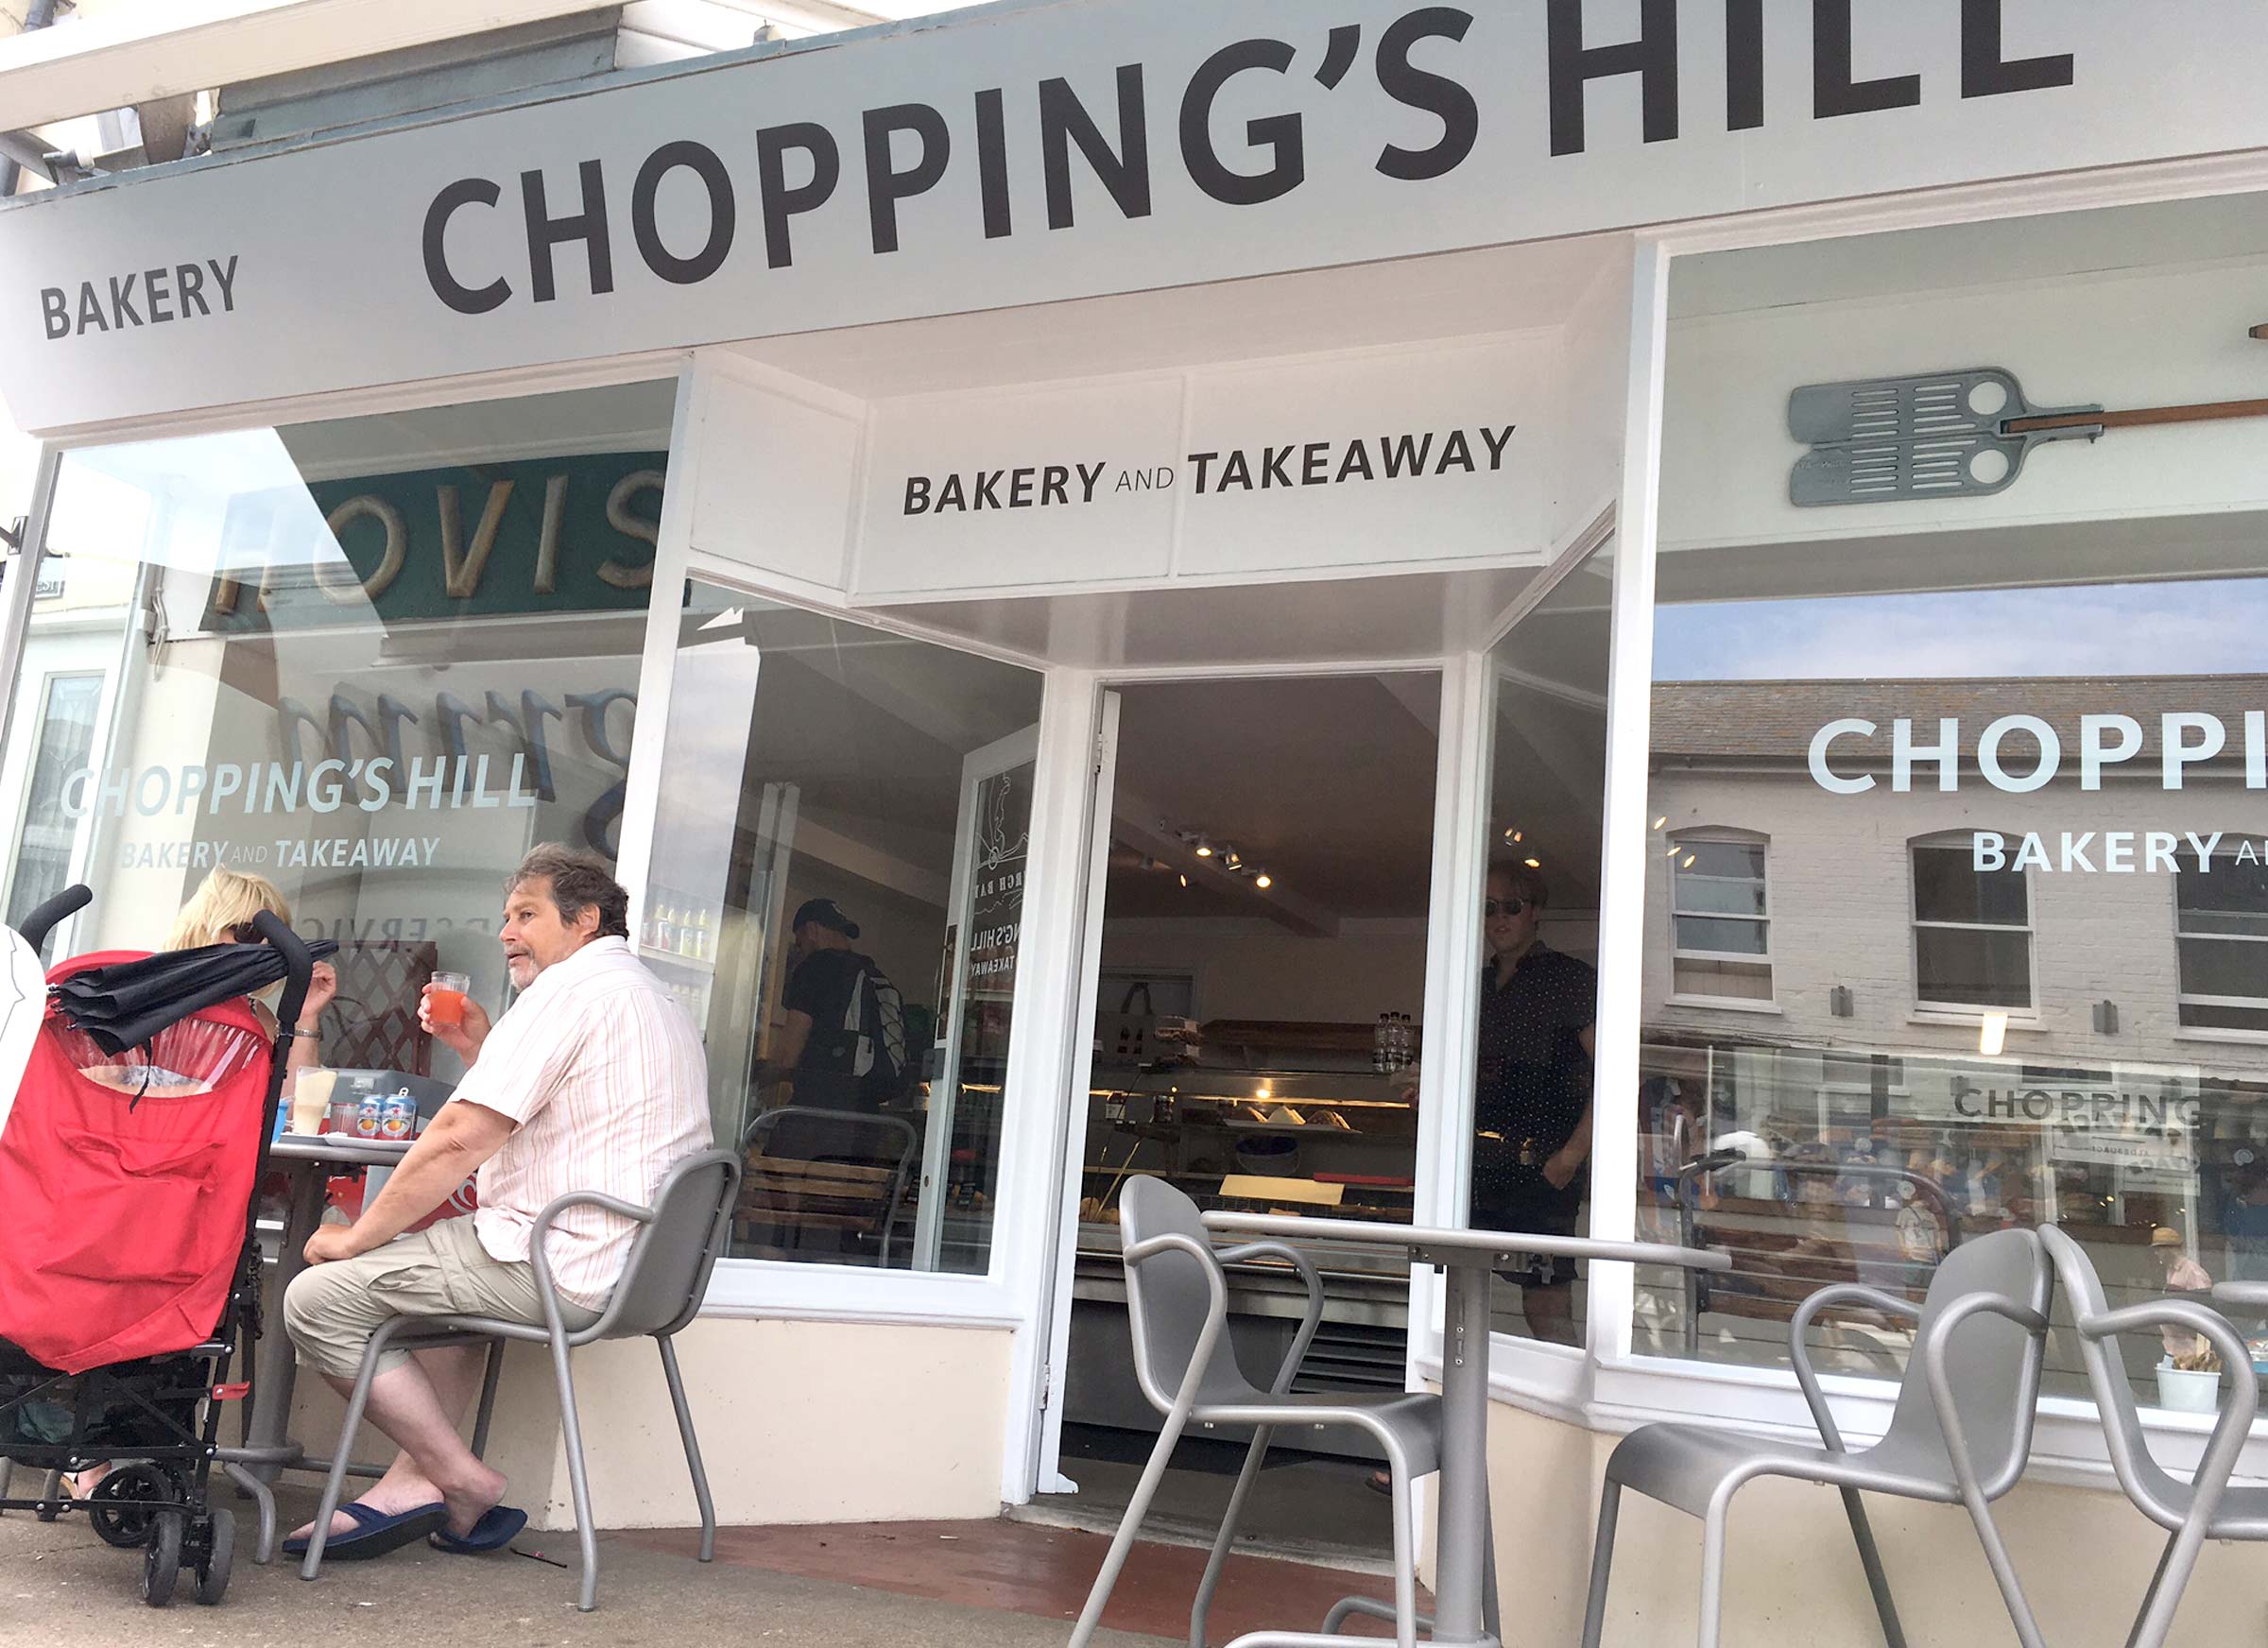 Chopping’s Hill Café and Bakery